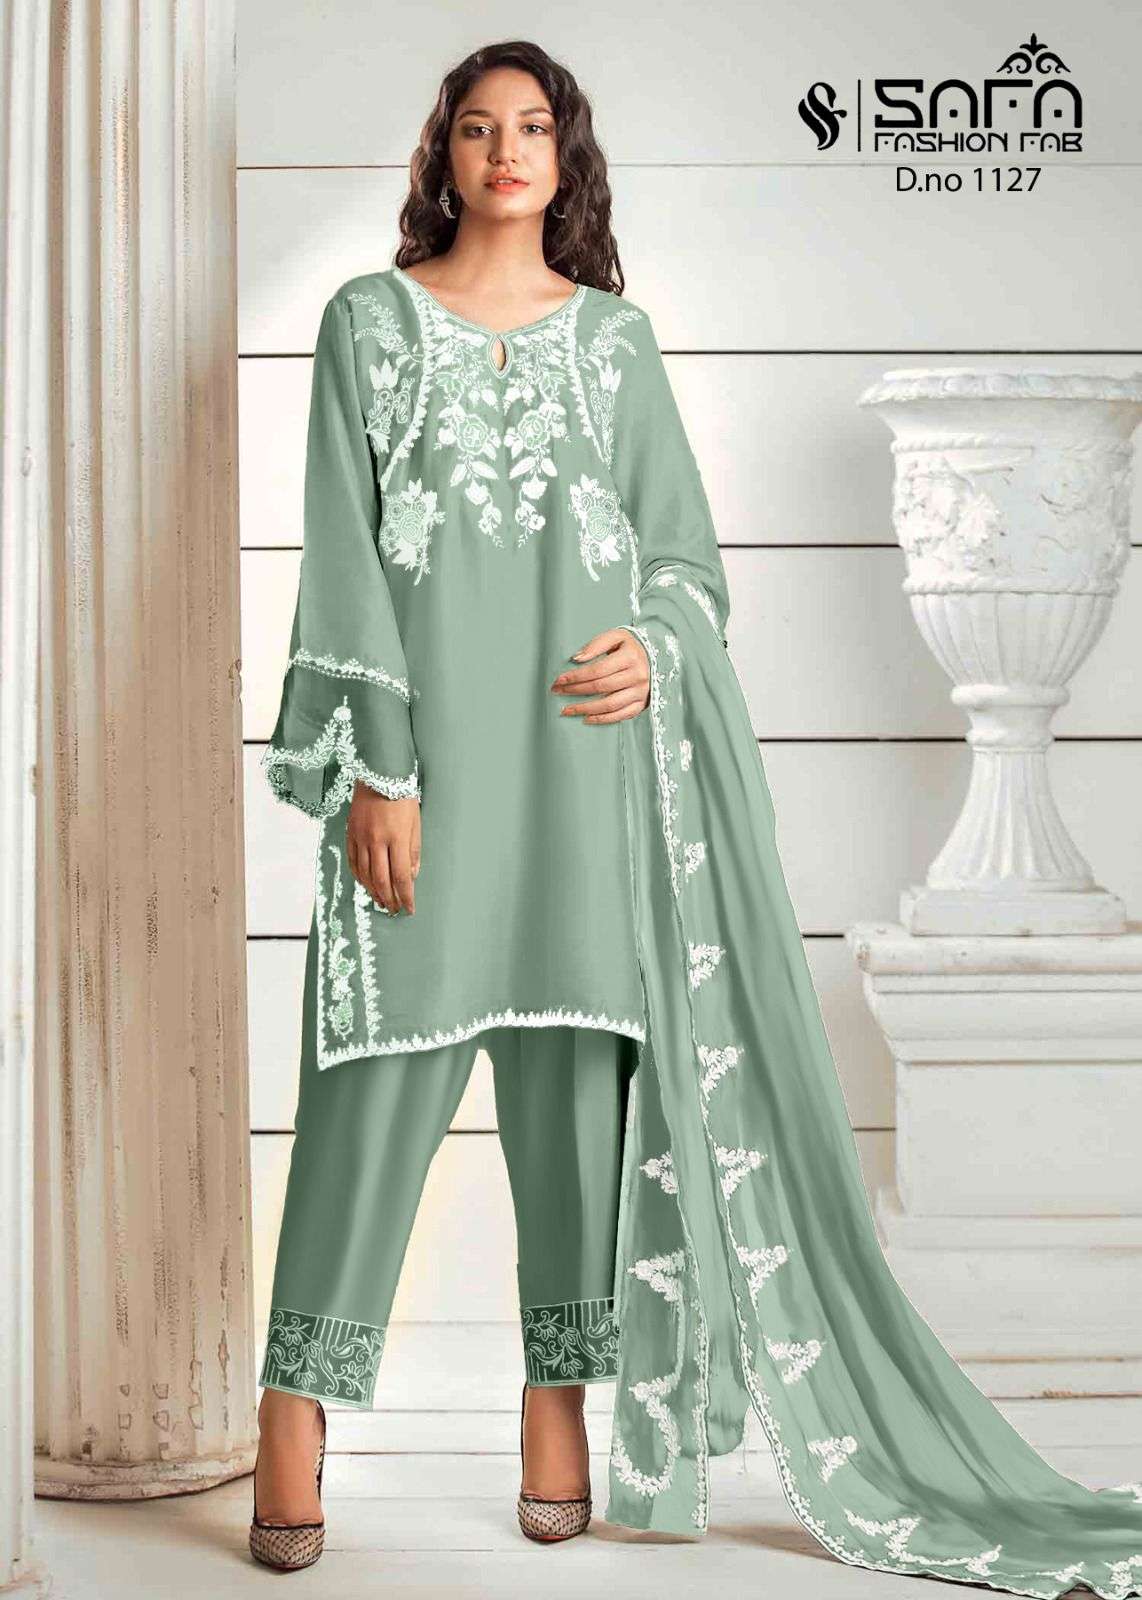 Ethnic pants for women for pairing with kurtas and tunics   Times of India